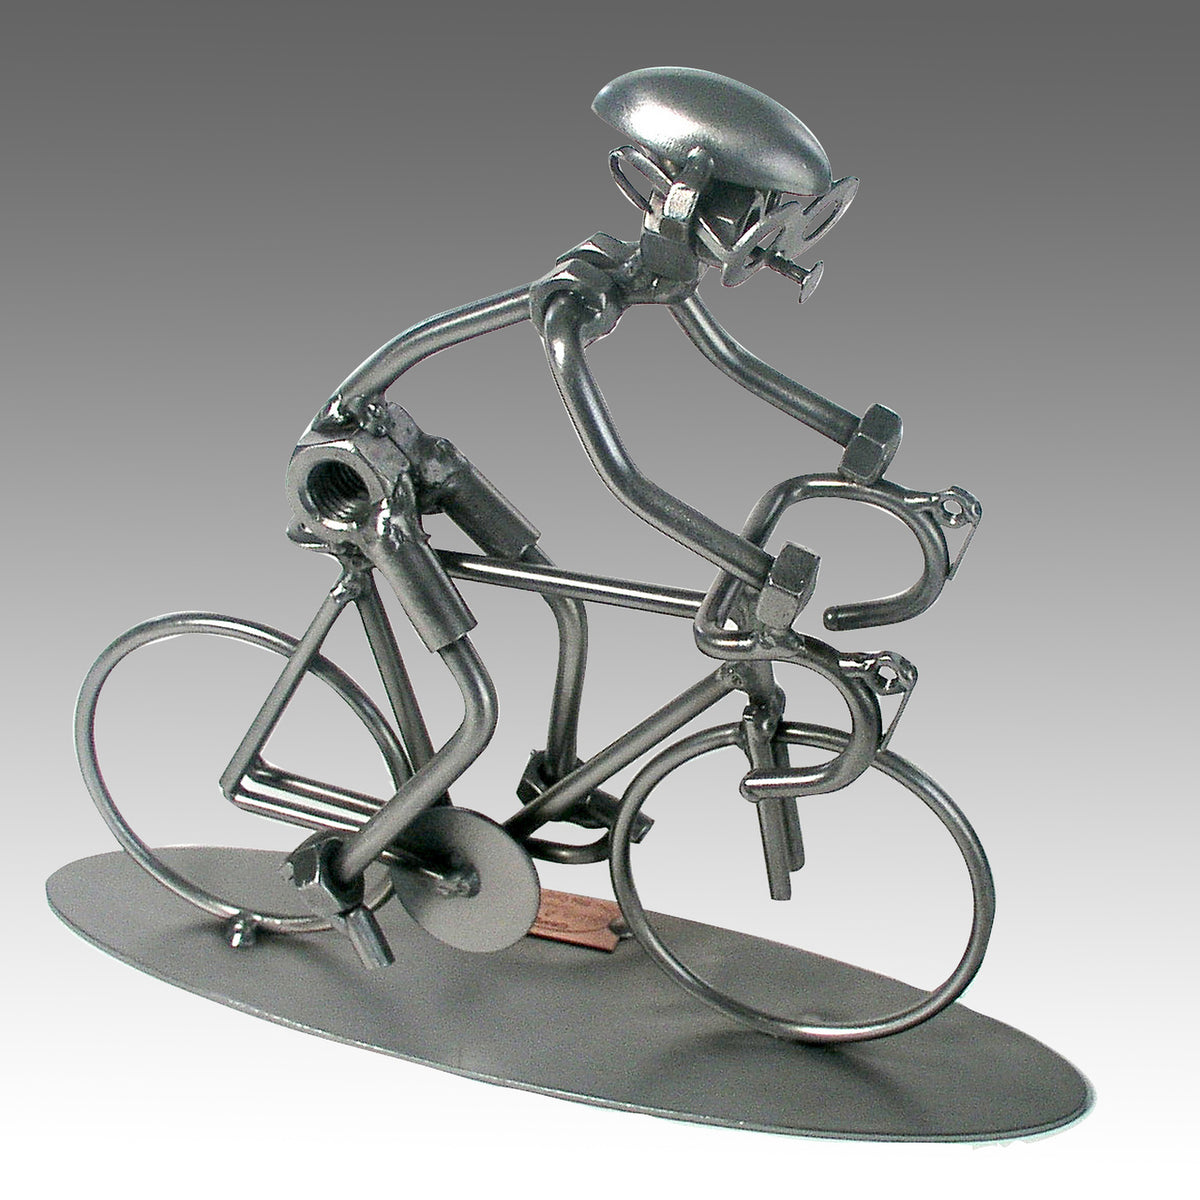 Bike Racing Nuts and Bolts Sculpture